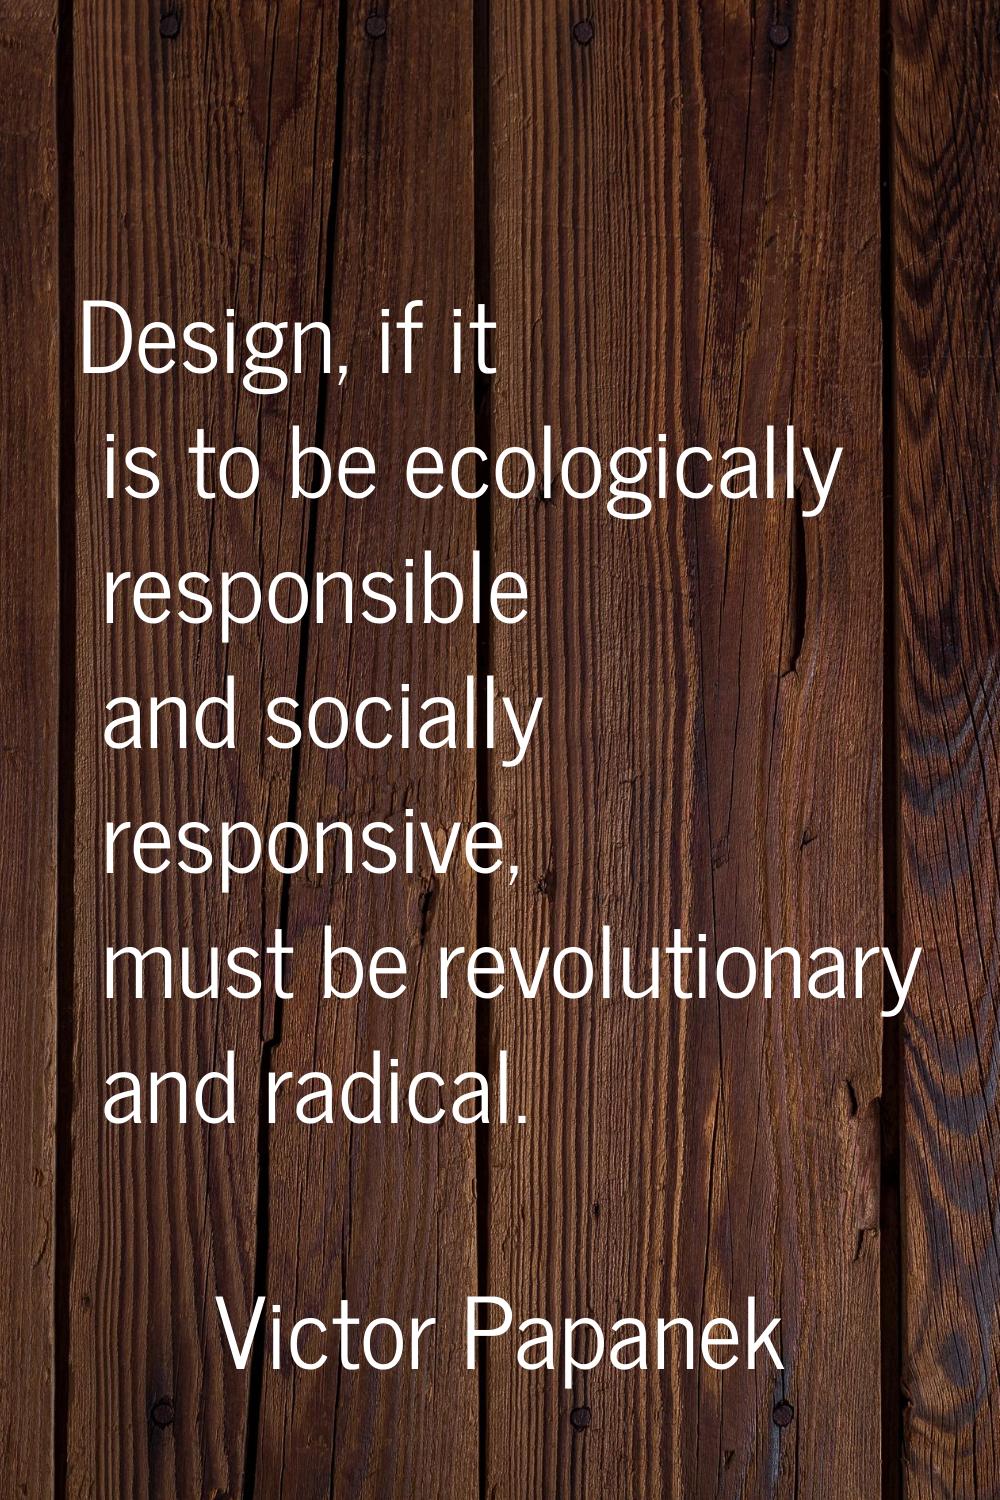 Design, if it is to be ecologically responsible and socially responsive, must be revolutionary and 